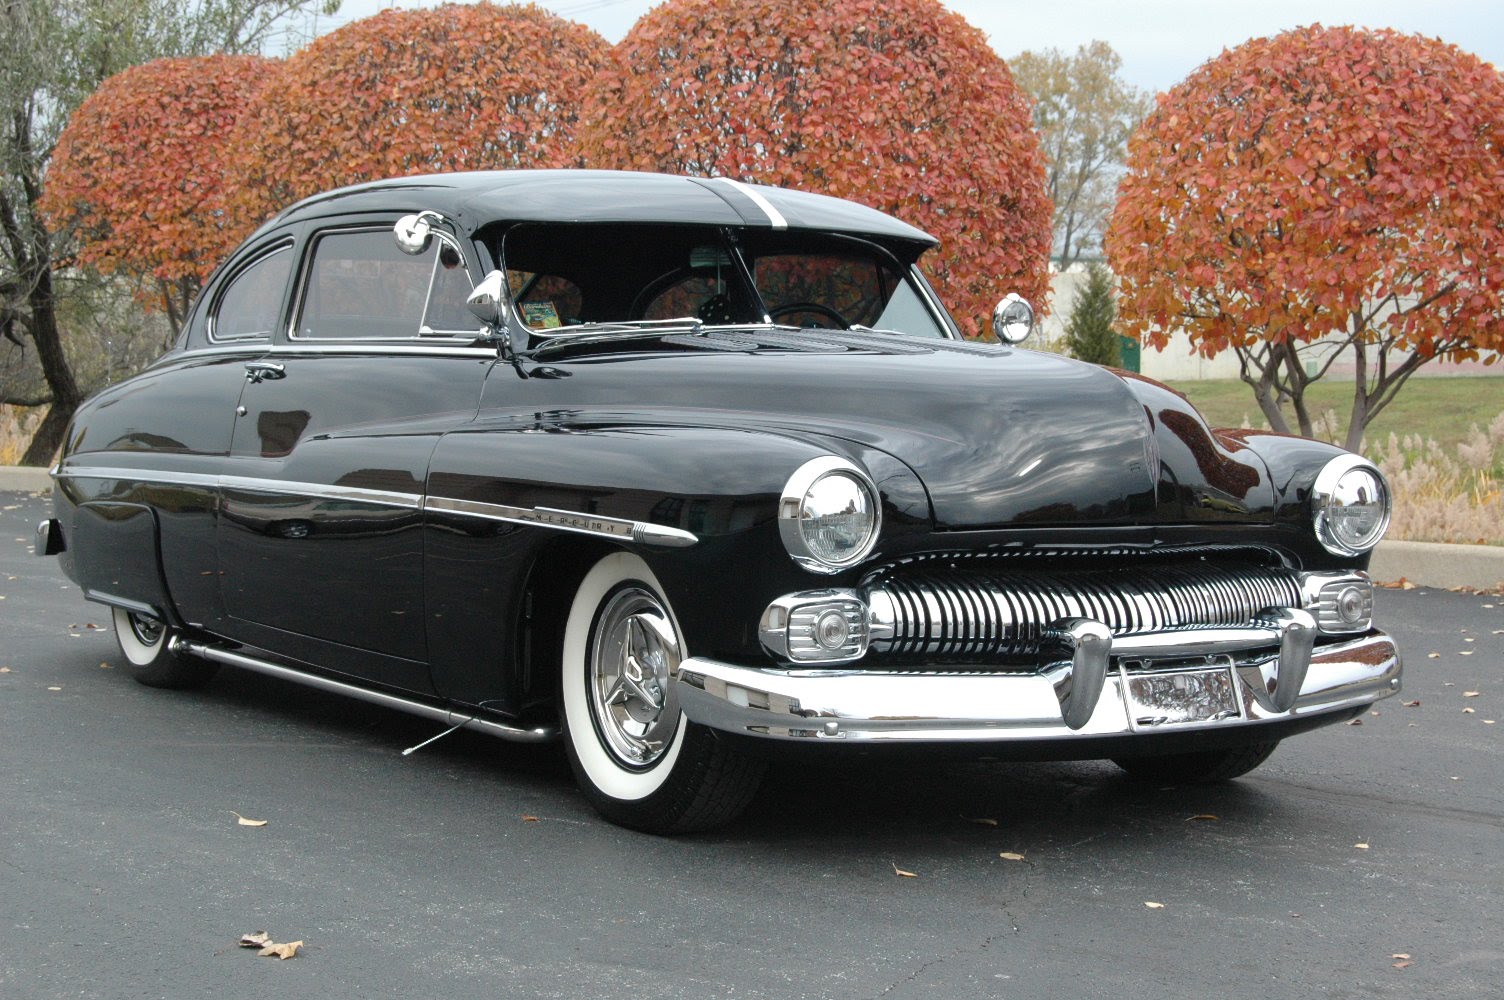 HQ 1950 Mercury Coupe Wallpapers | File 328.2Kb